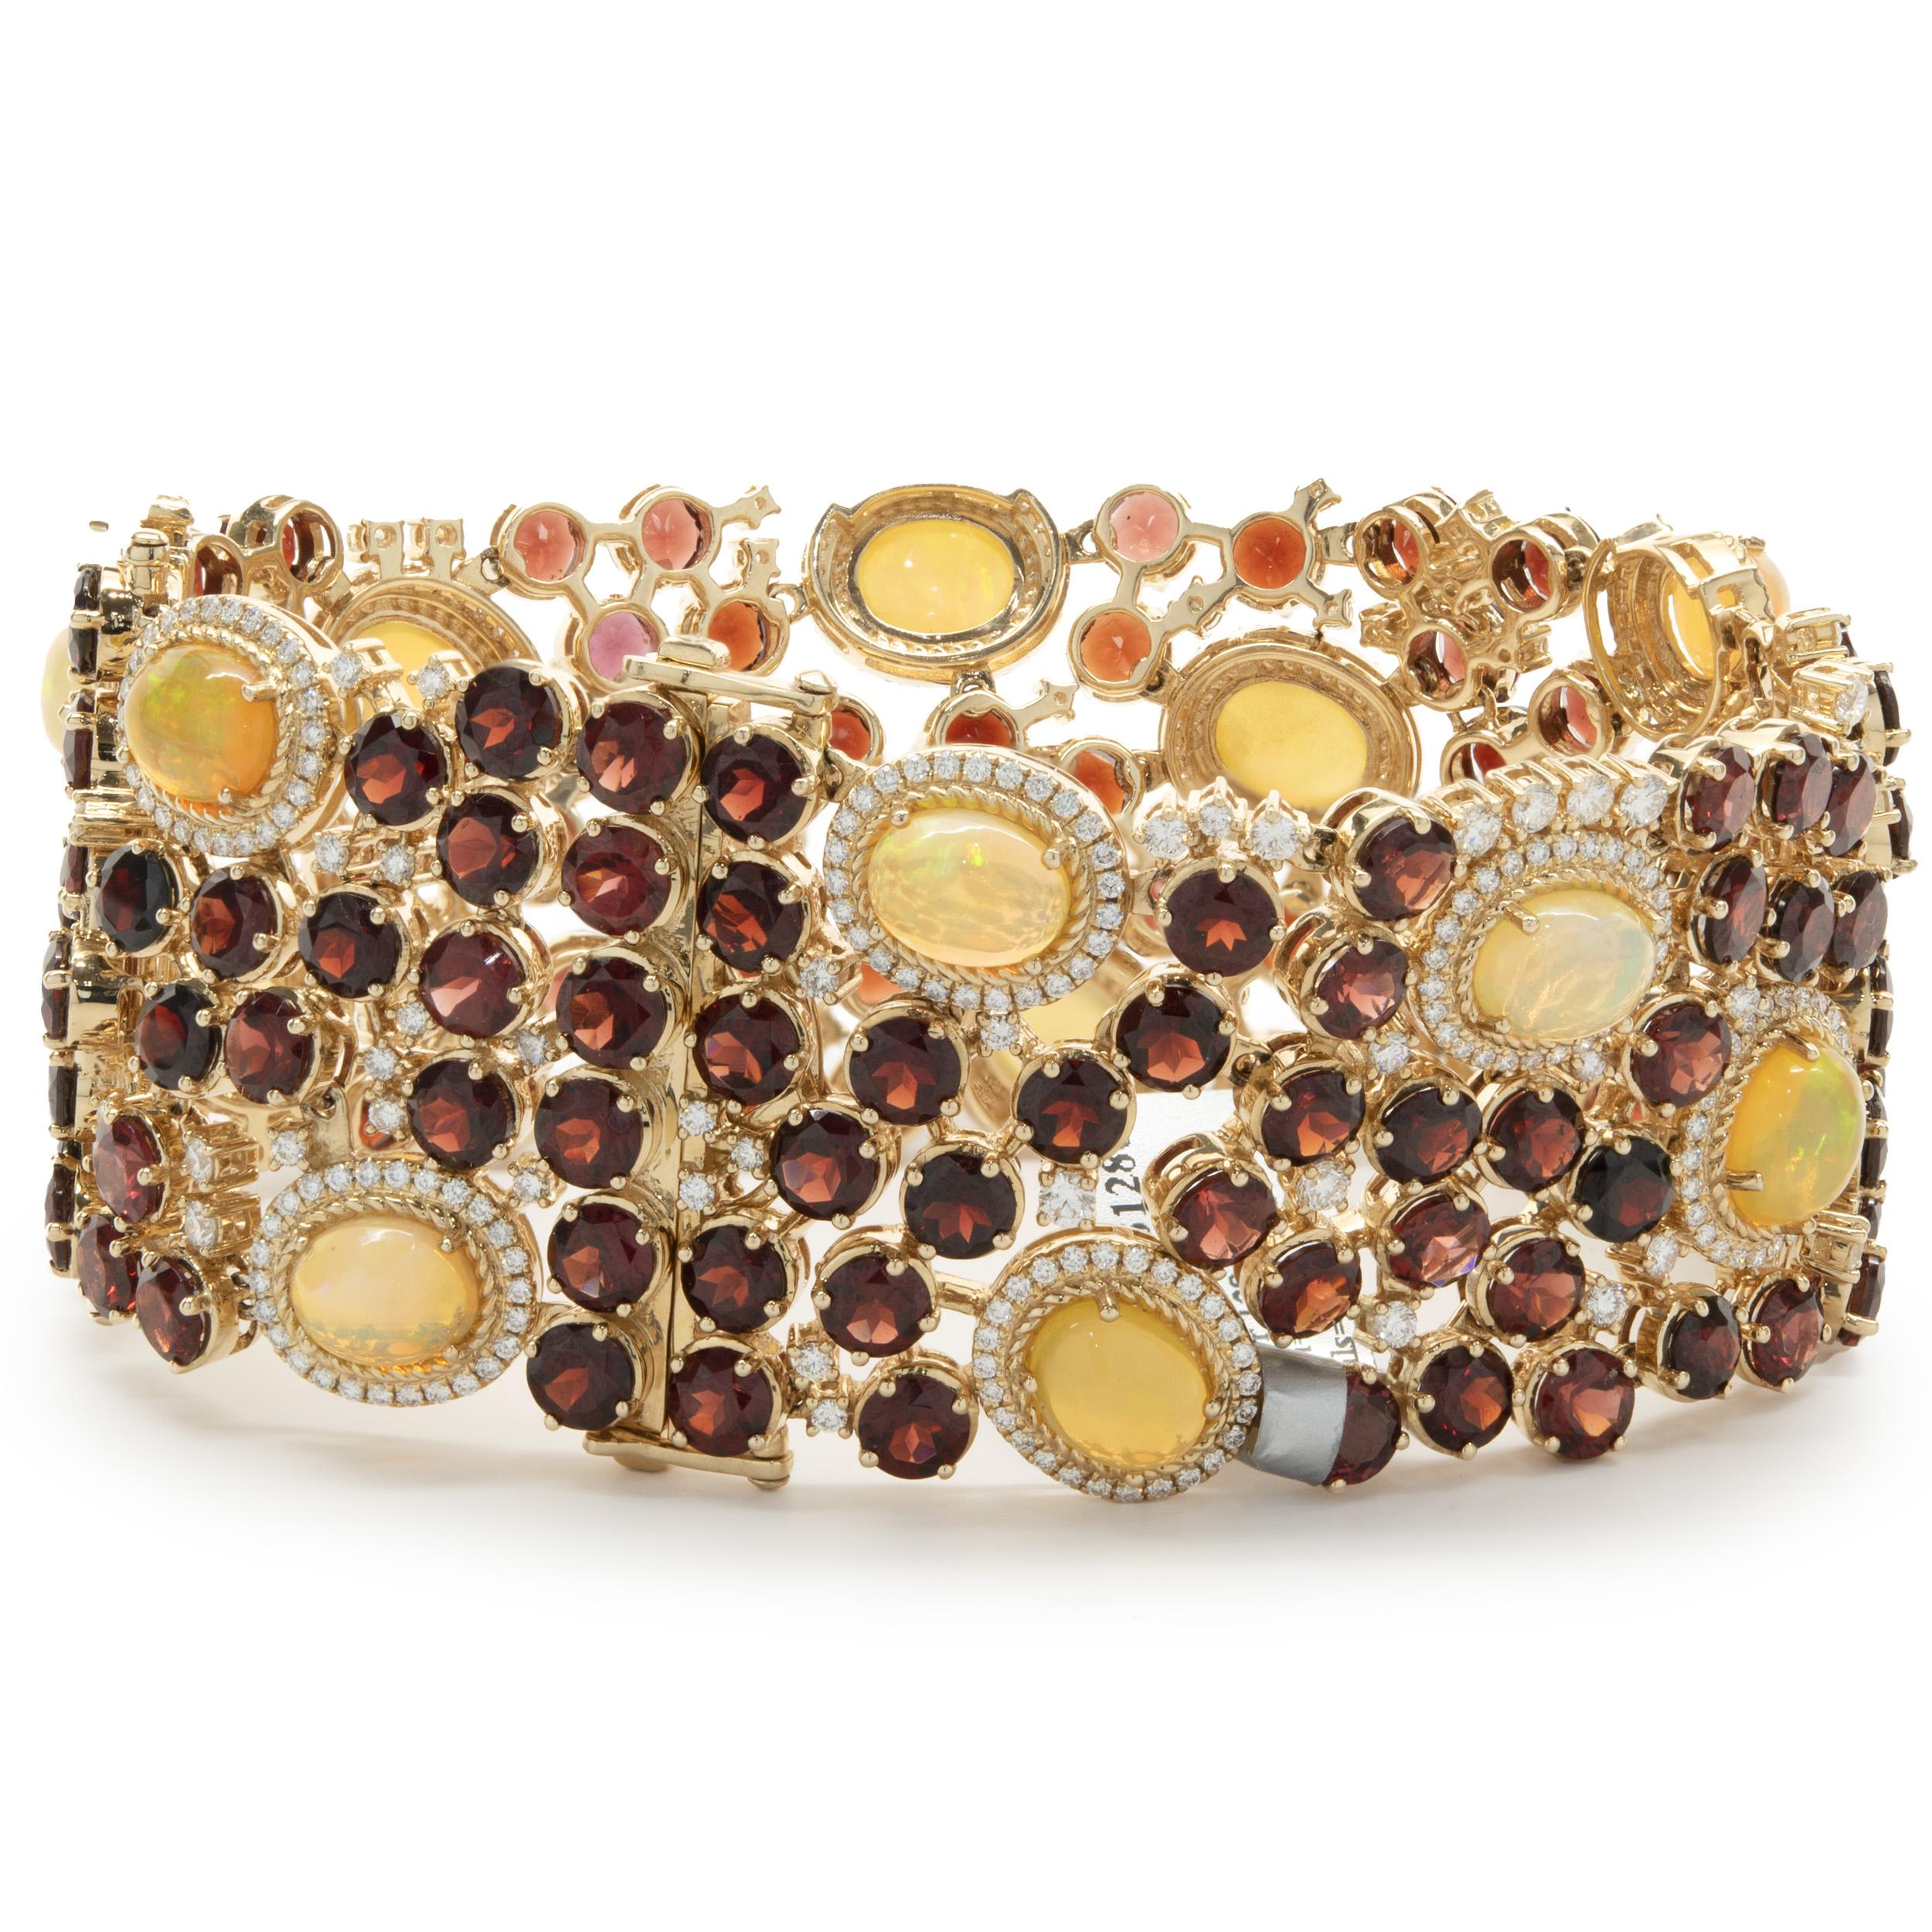 Designer: custom
Material: 14K yellow gold
Garnet: 129 round cut = 75.51cttw
Opal: 14 cabochon cut = 17.17cttw
Weight: 111.42 grams
Dimensions: bracelet measures 7-inches in length, 1.5-inch extender
